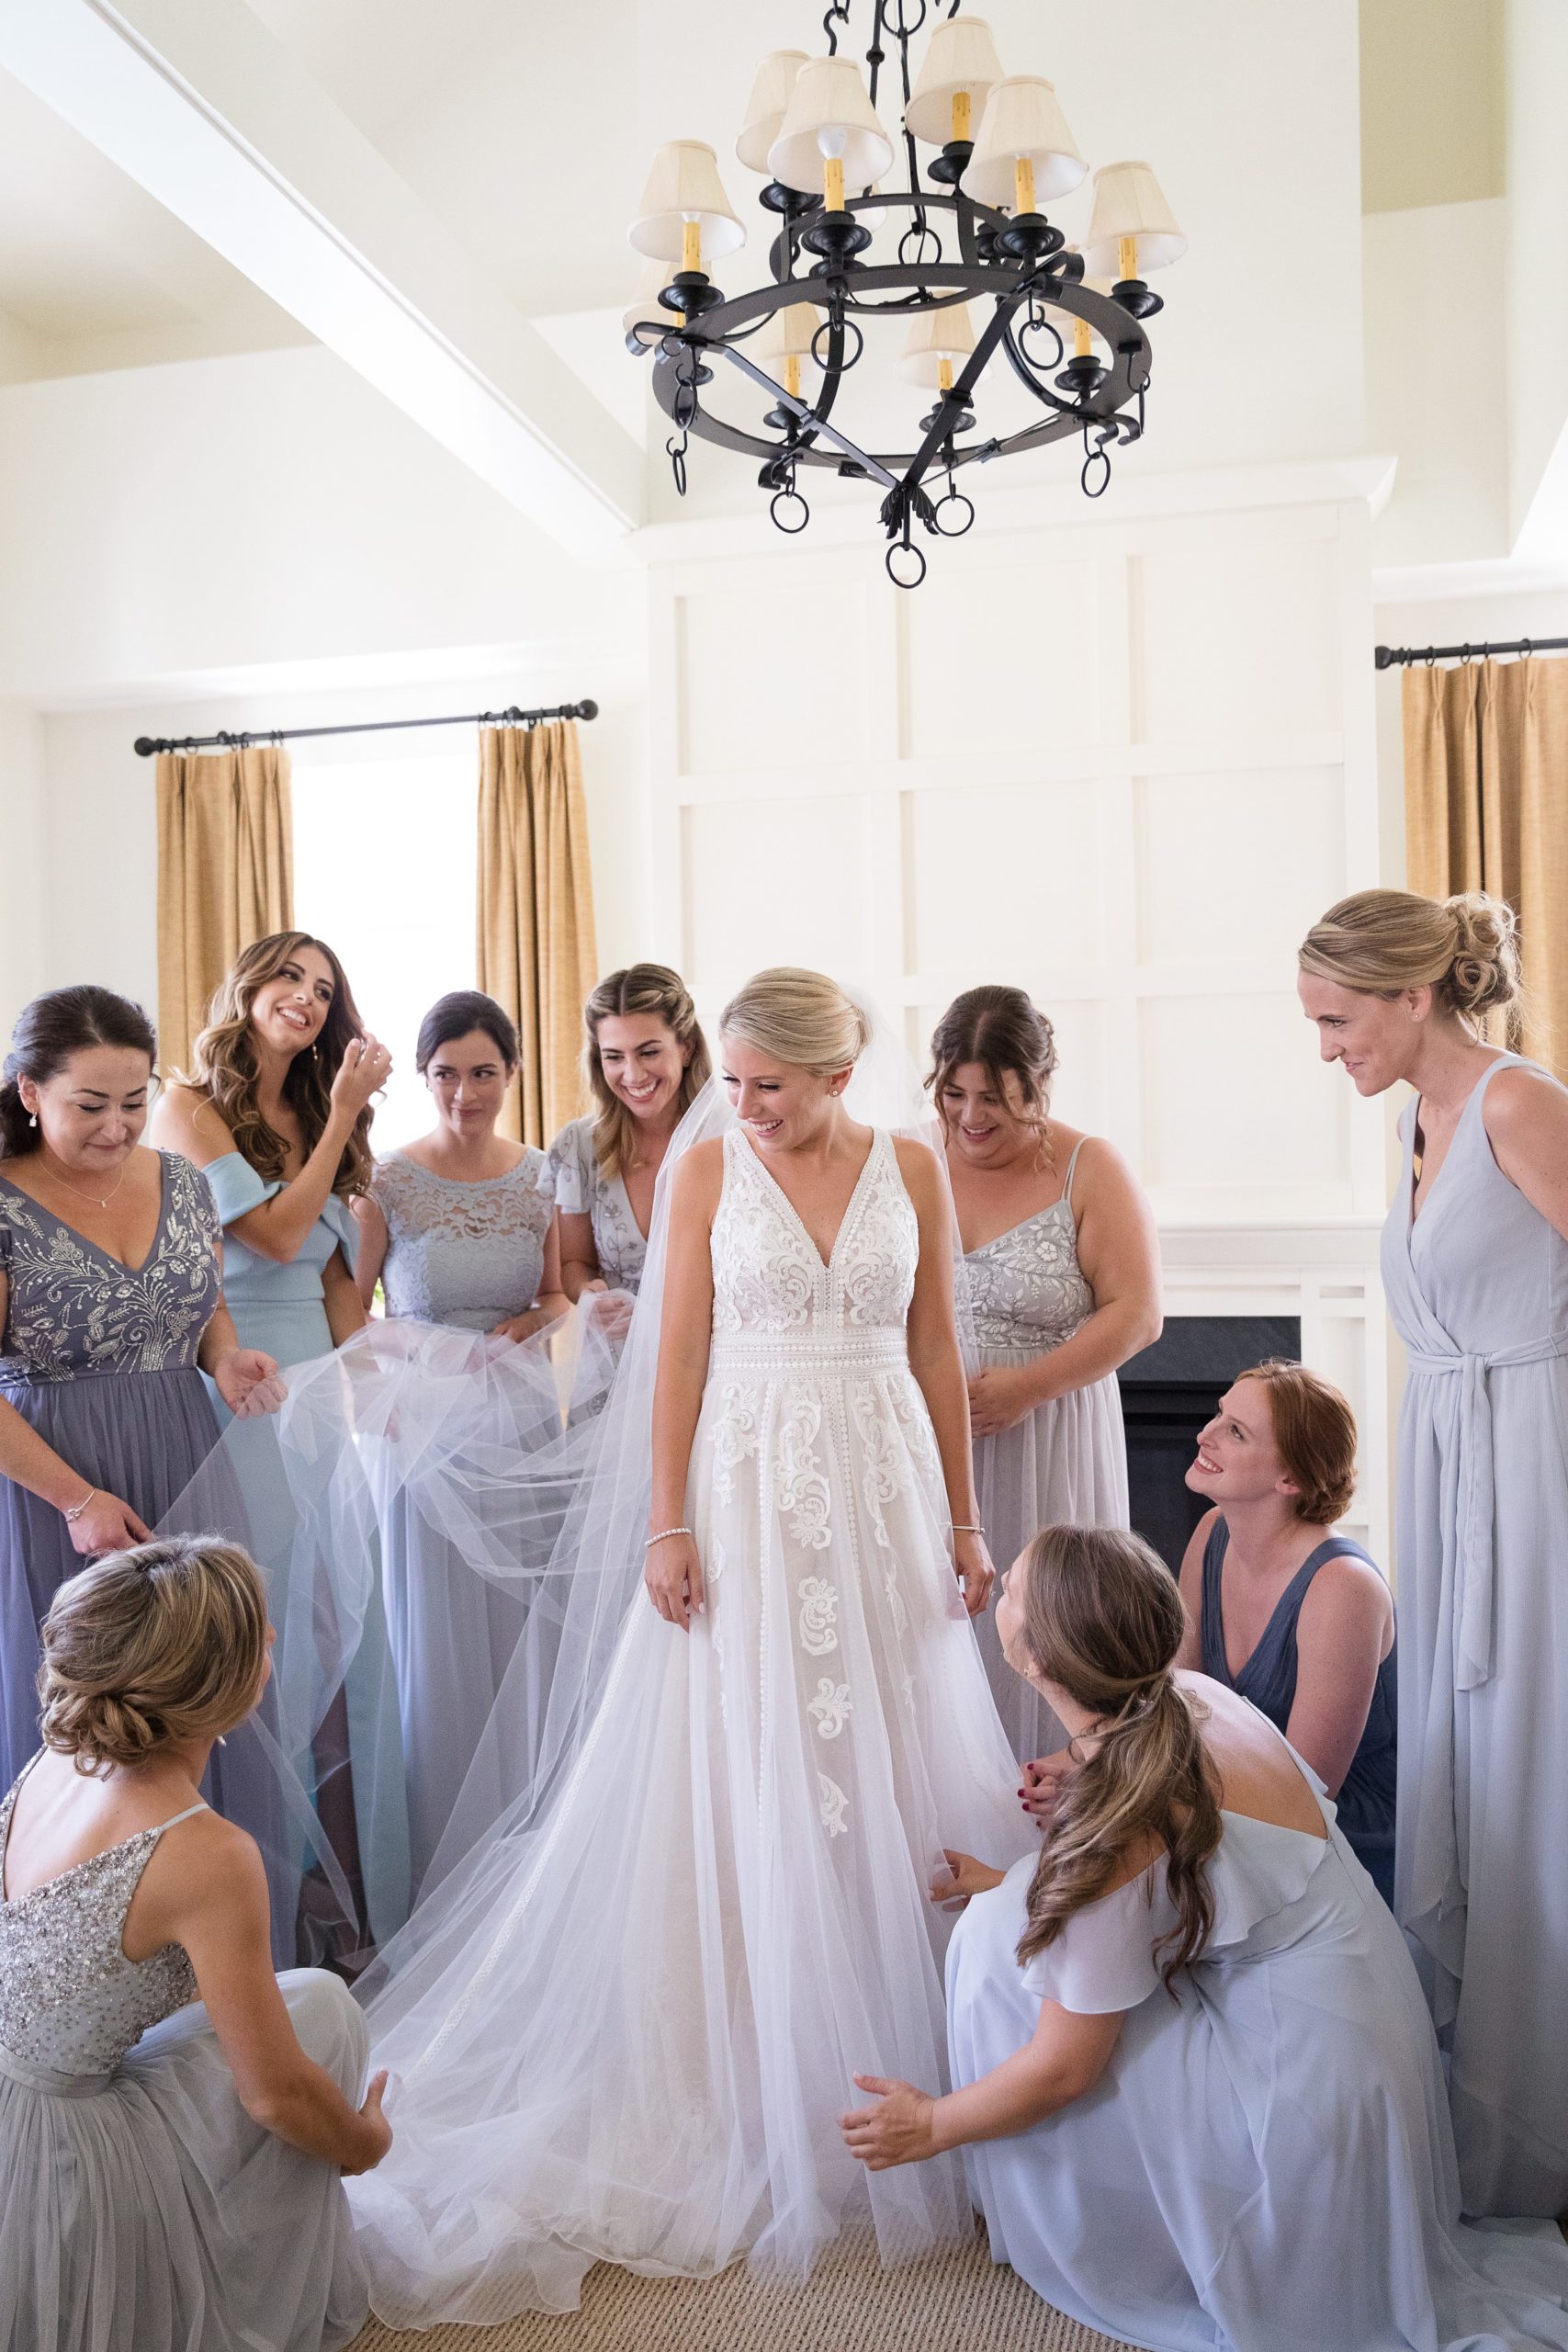 Bride getting ready with bridesmaids all around her